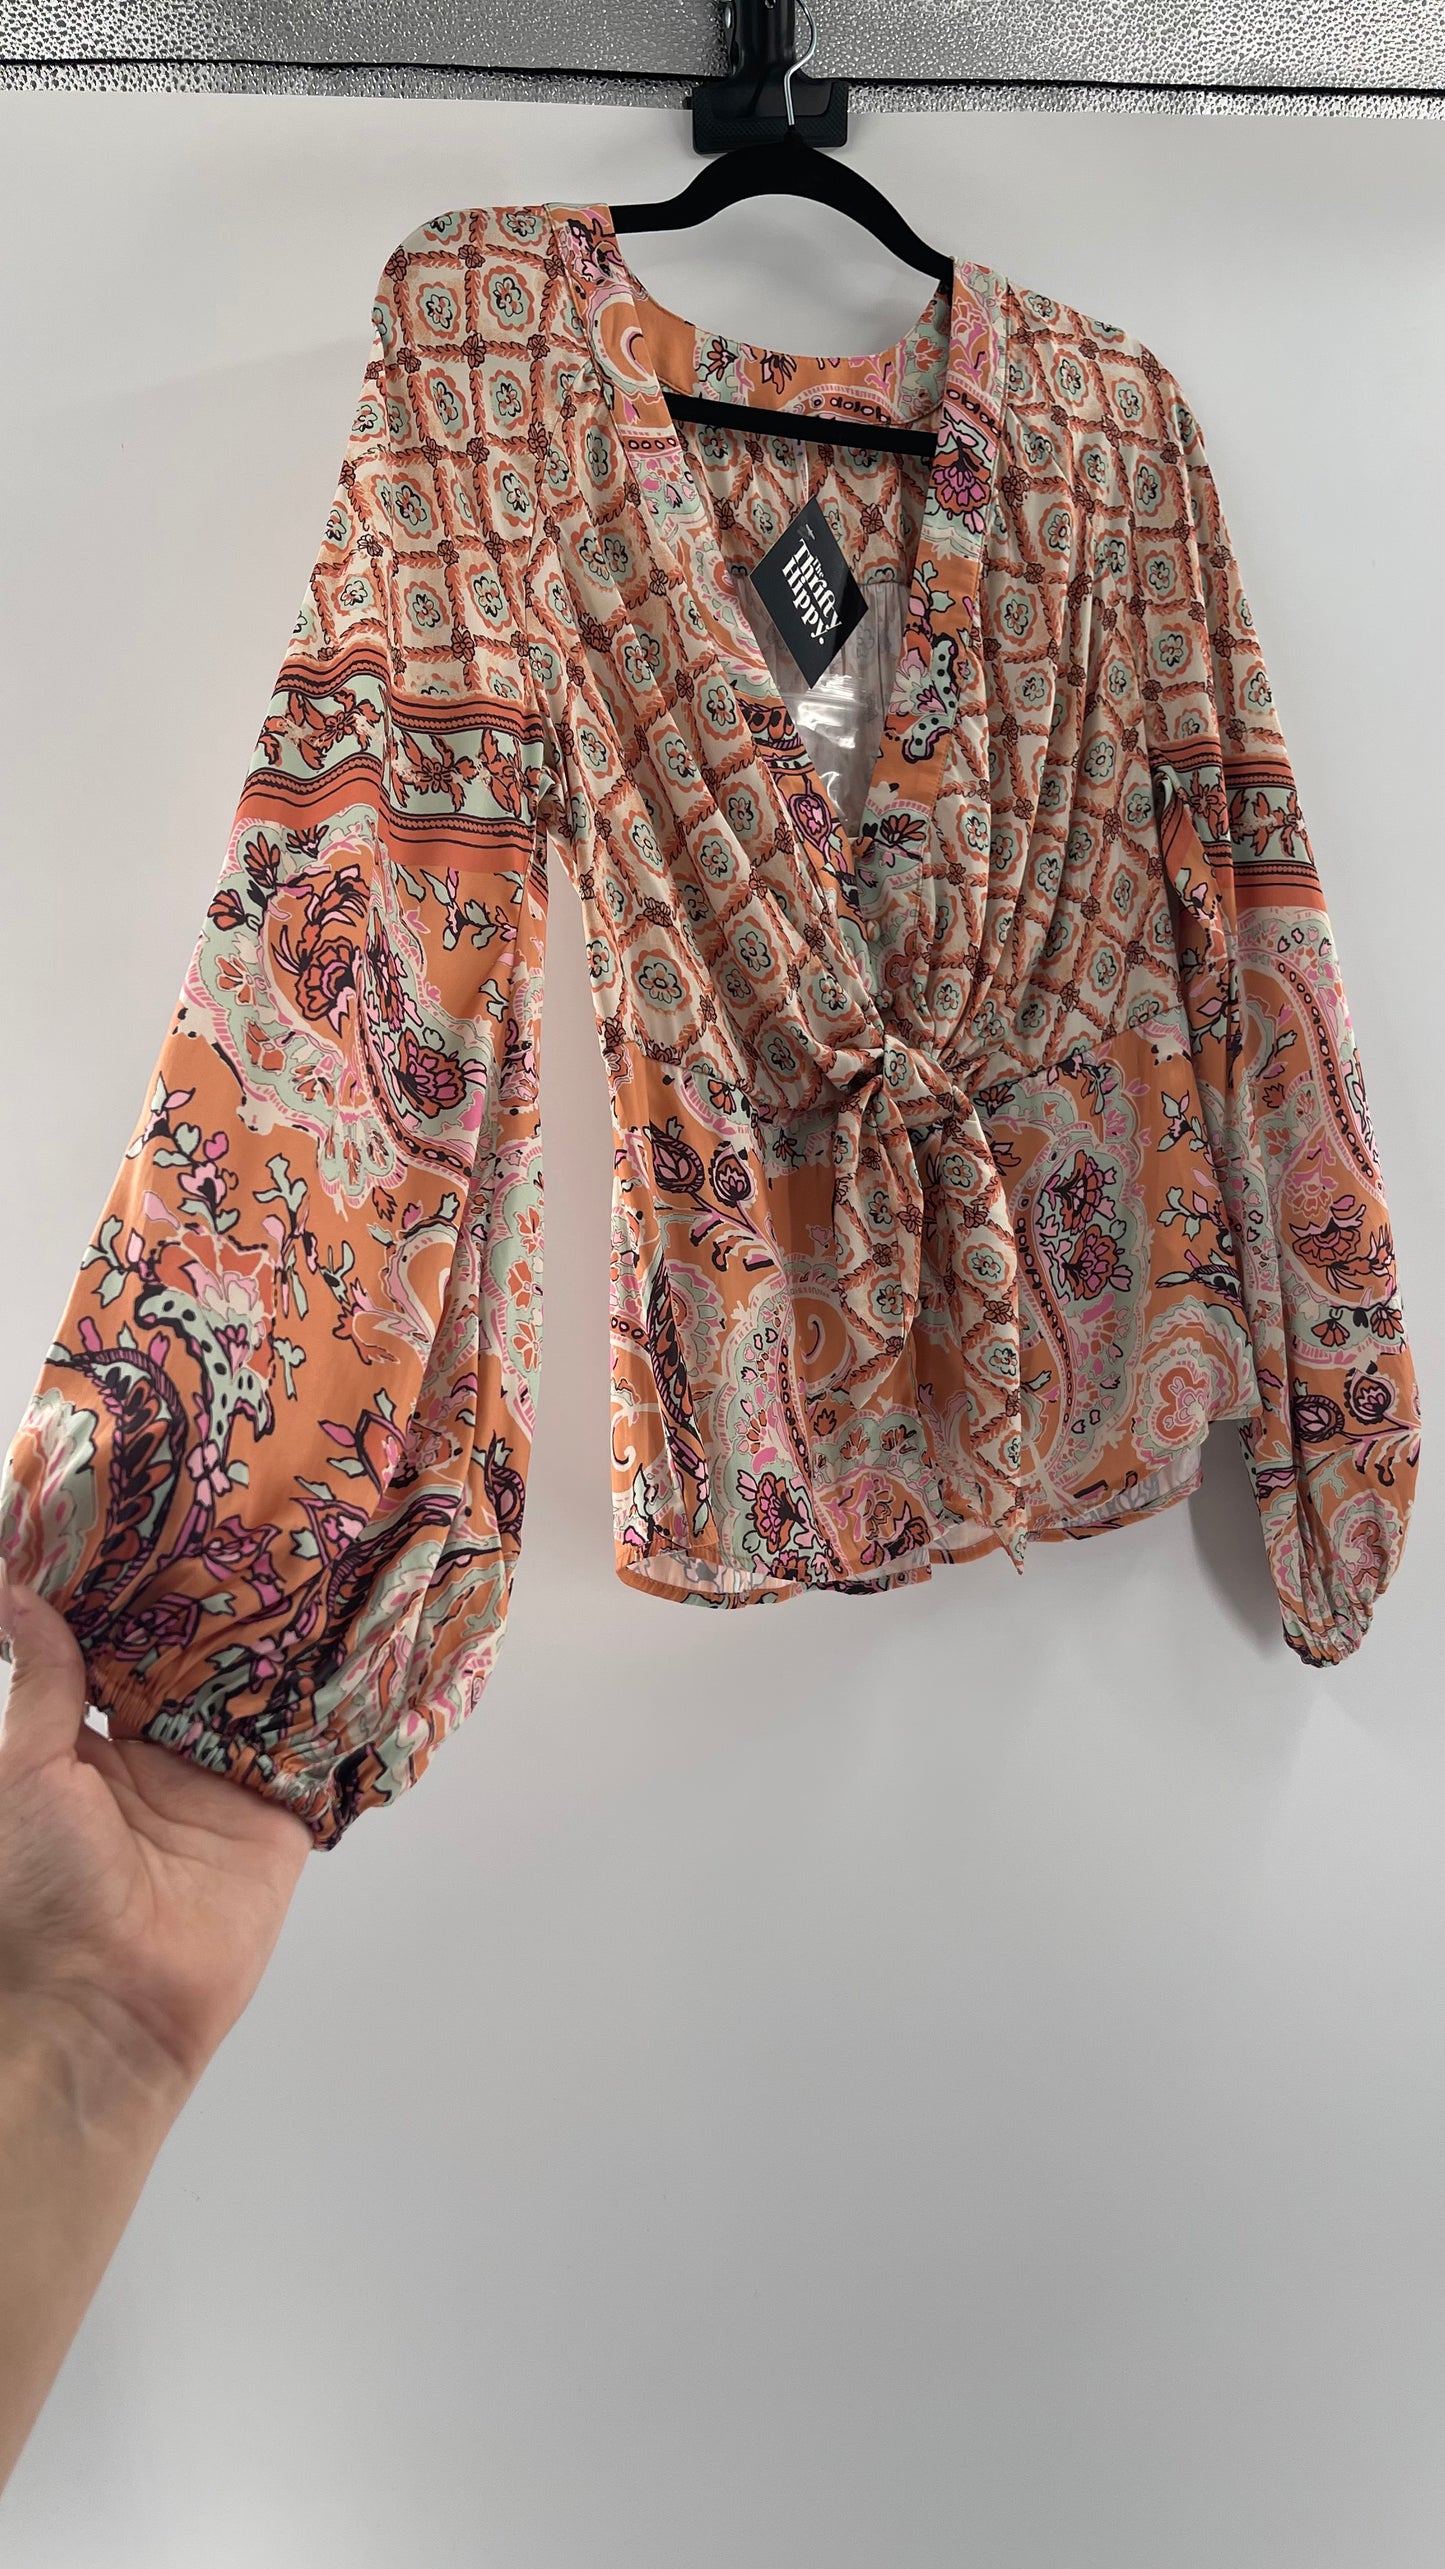 Free People Silky Orange Paisley Tie Front Blouse (XS)